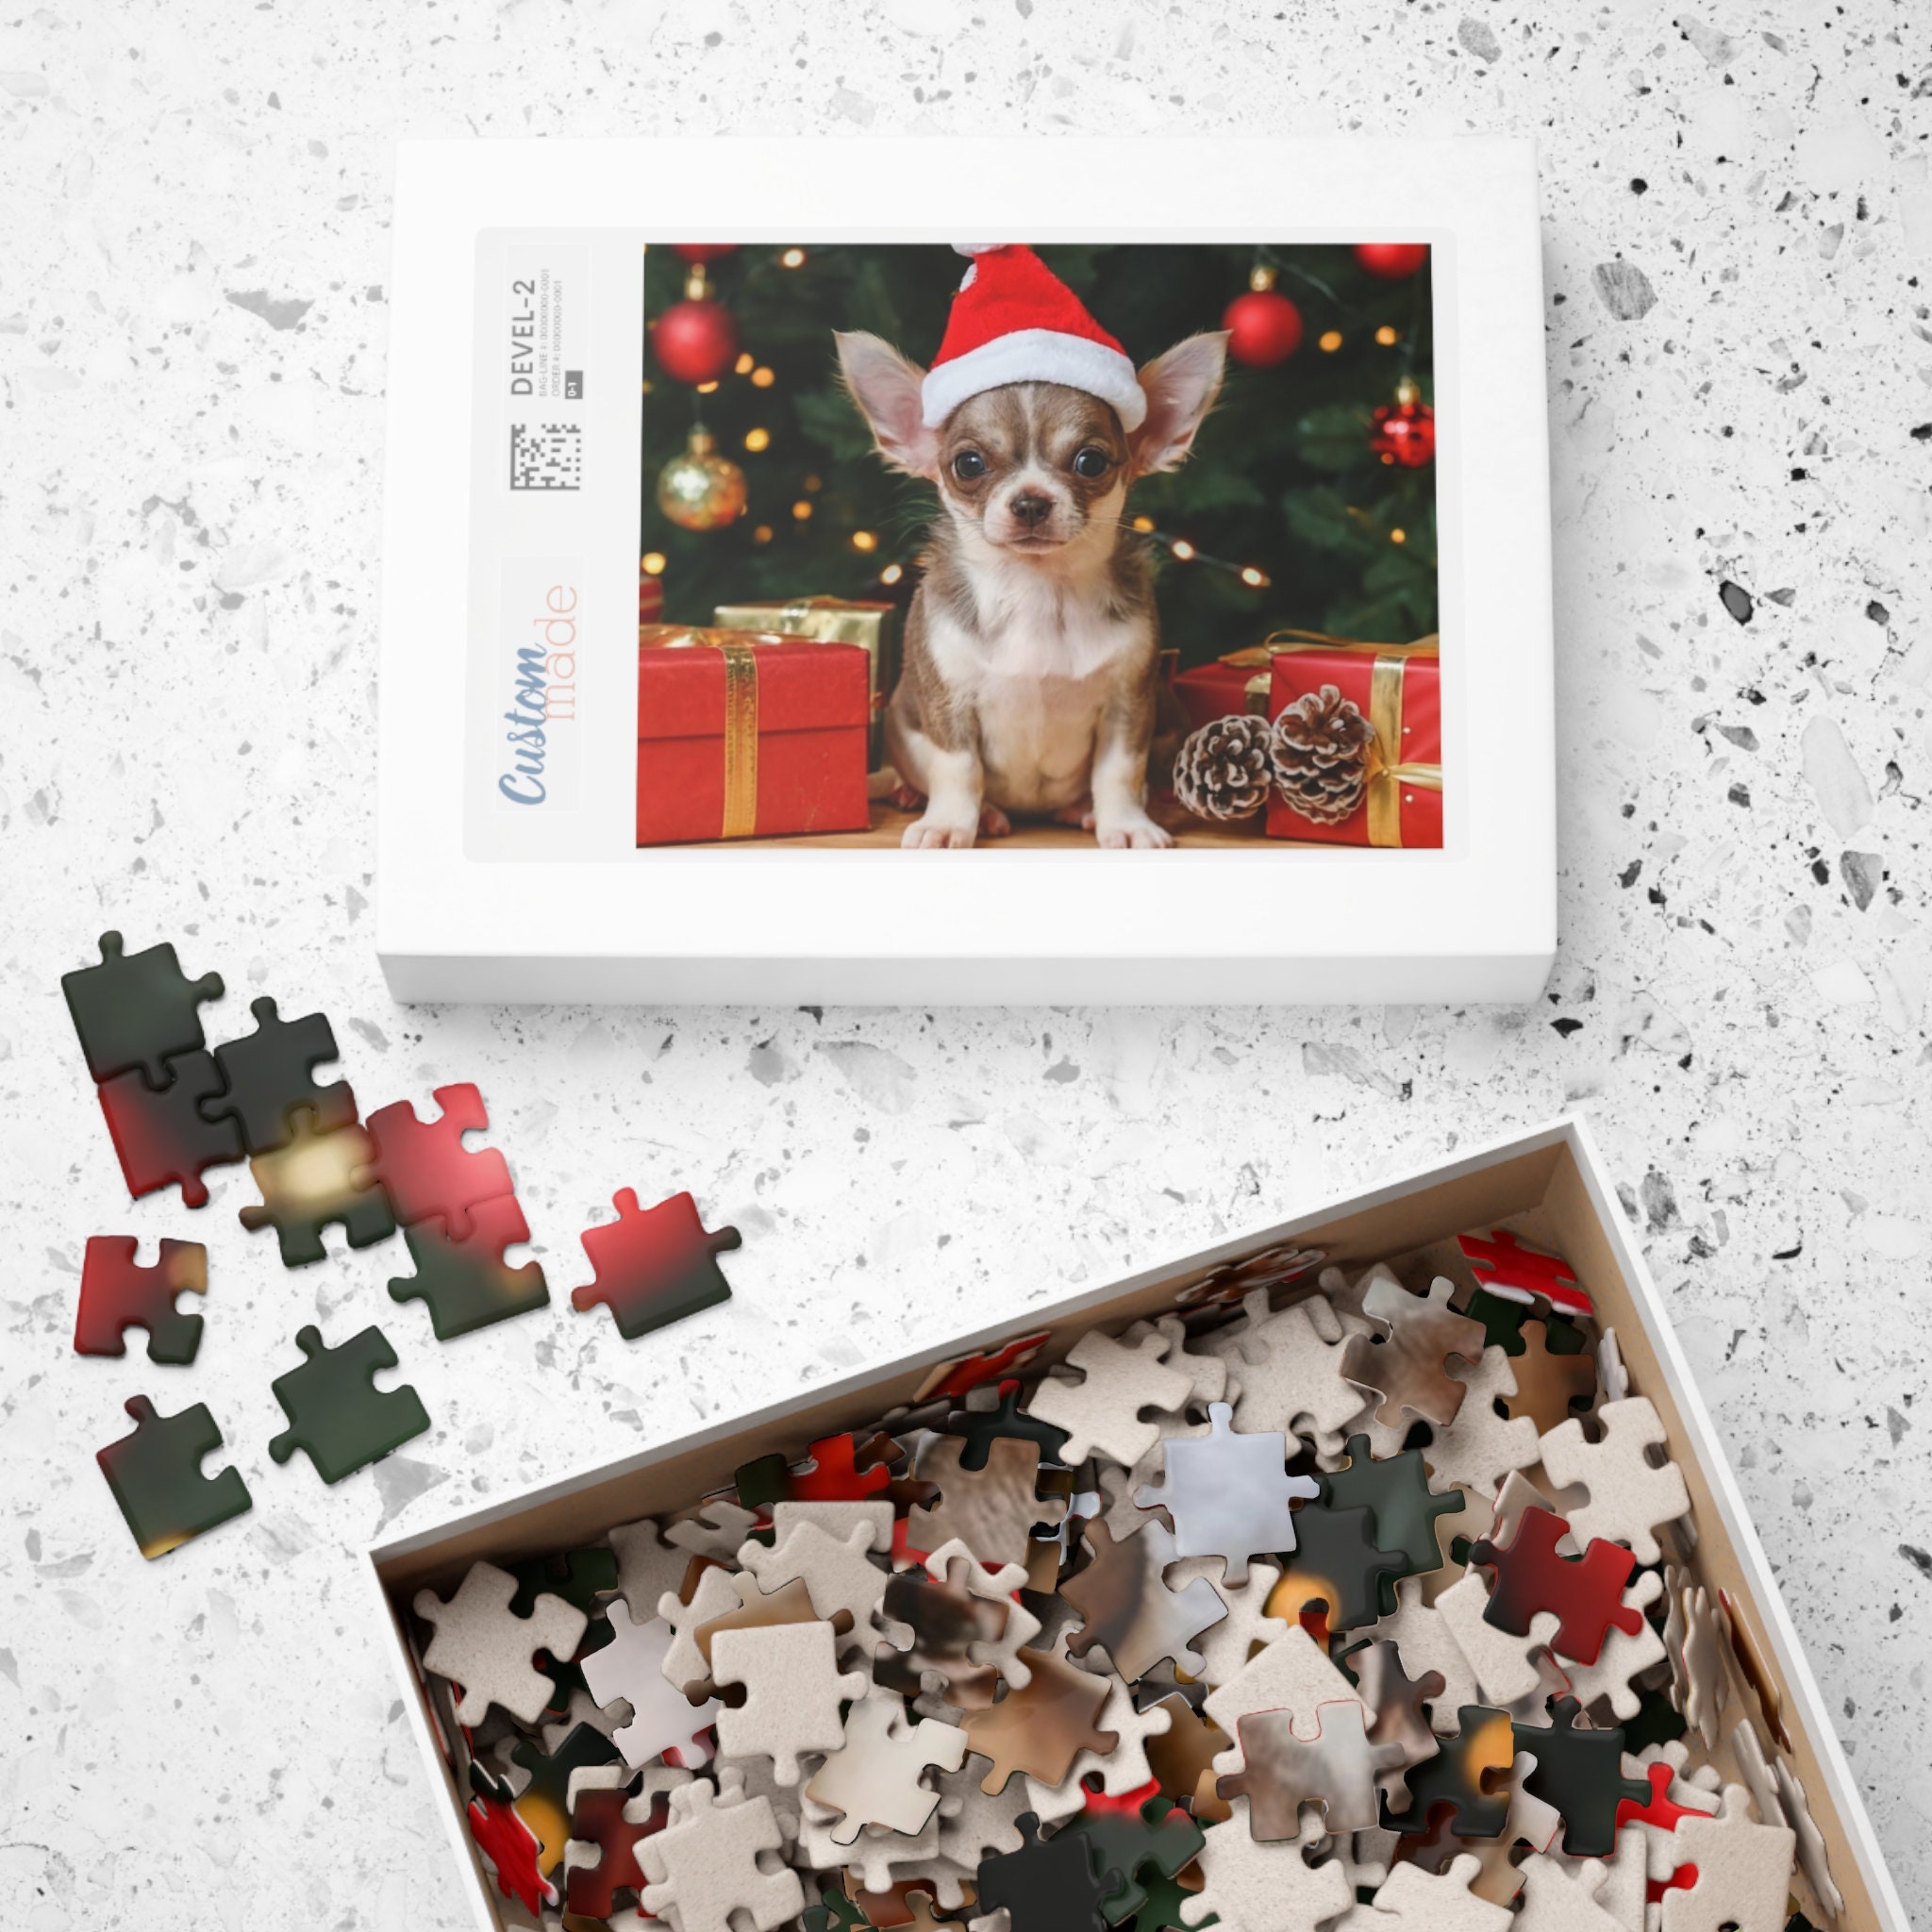 Chihuahua 1000 Piece Jigsaw Puzzle By Go! Games Fun For The Whole